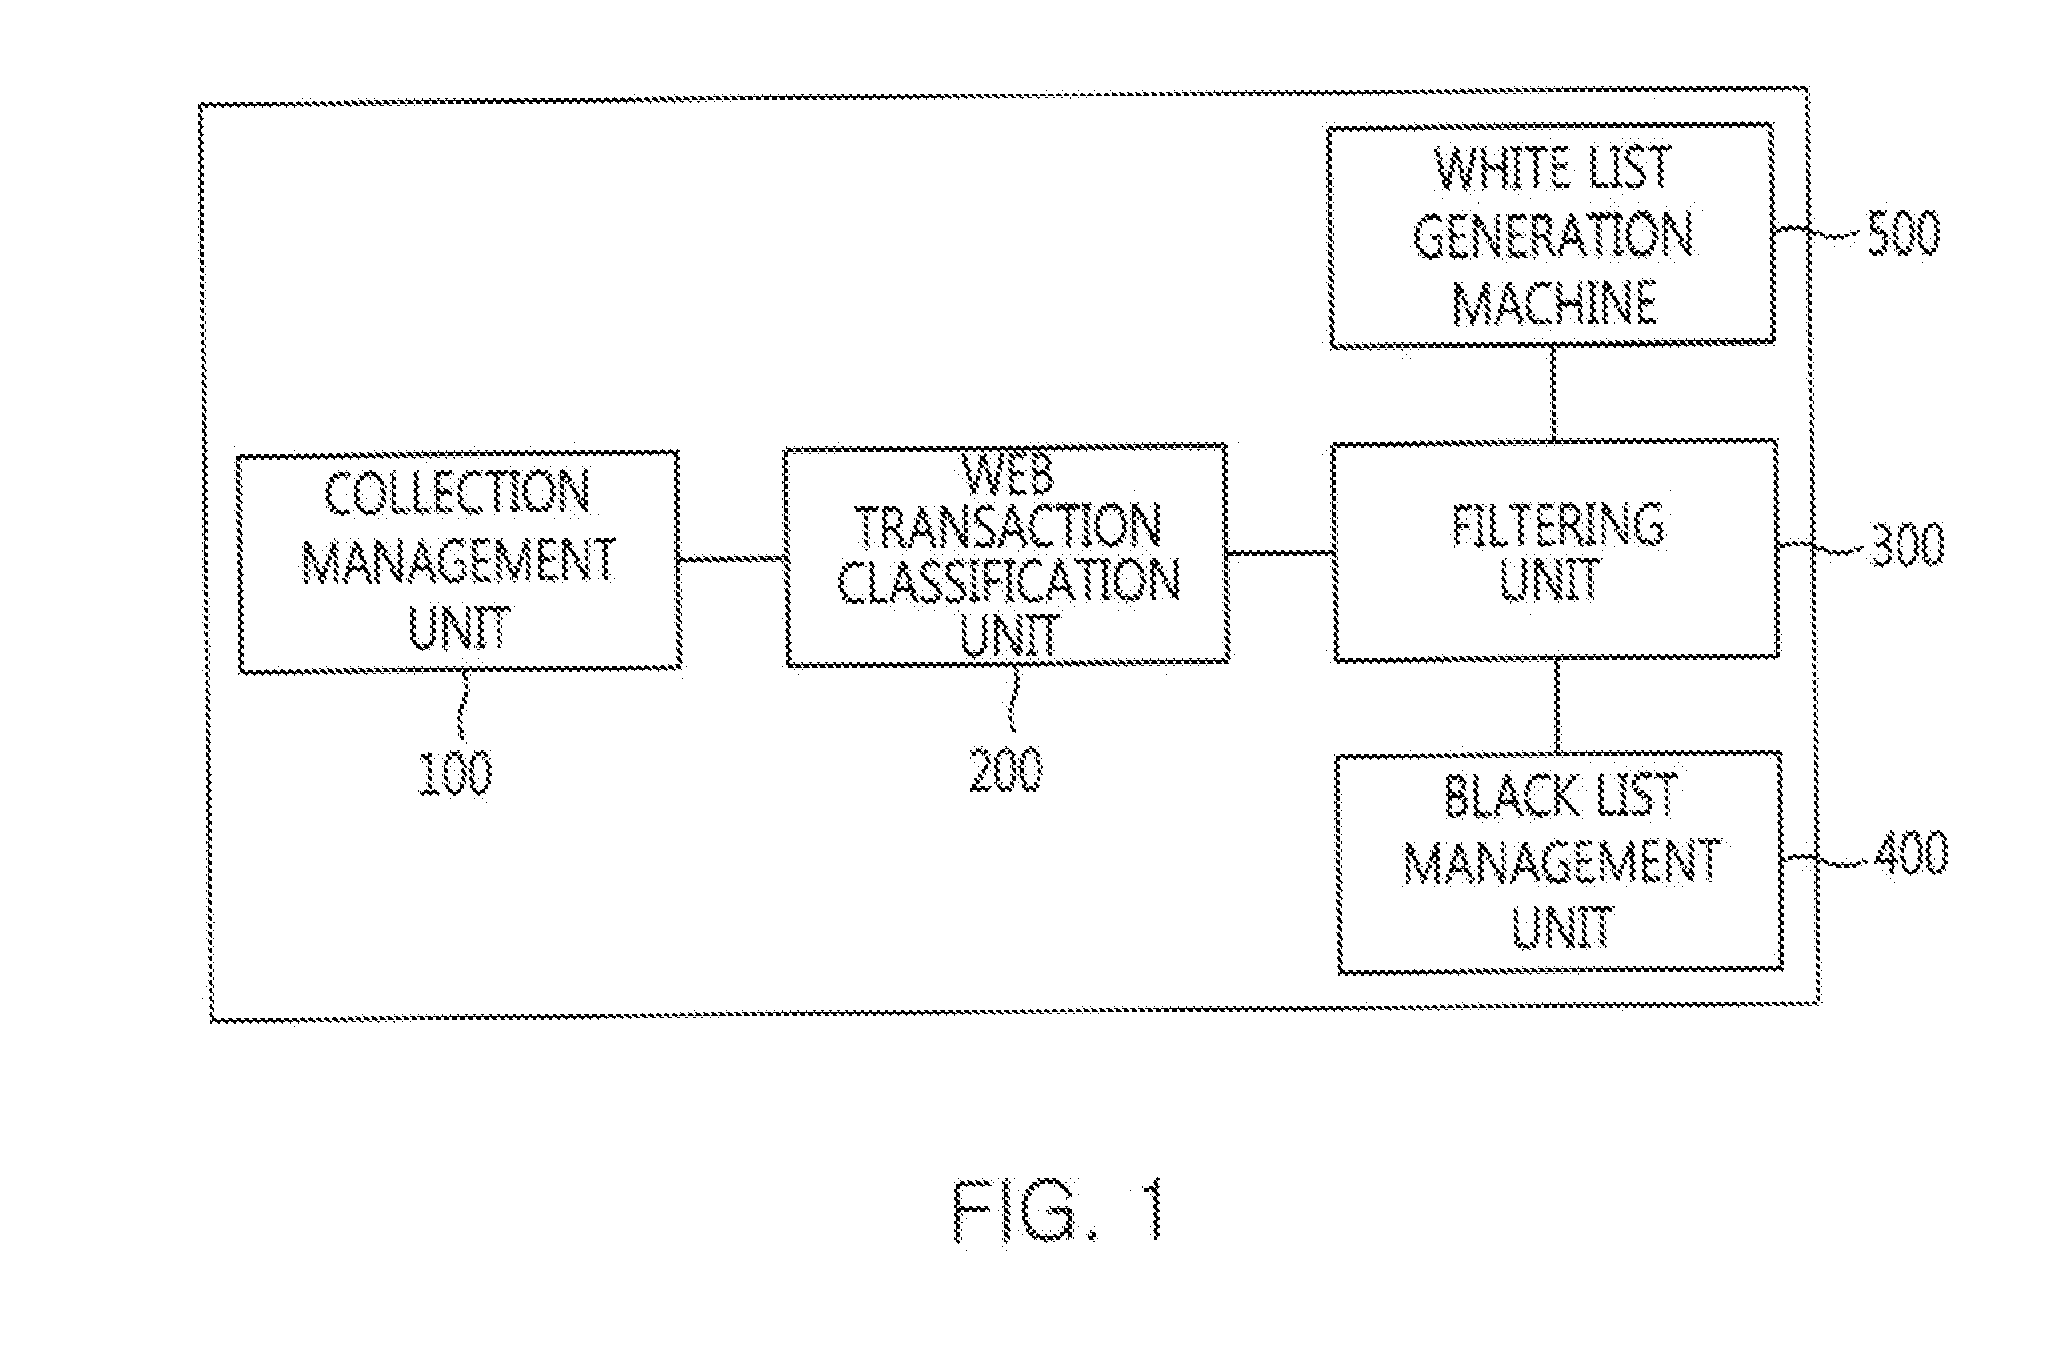 Apparatus and method for detecting HTTP botnet based on densities of web transactions